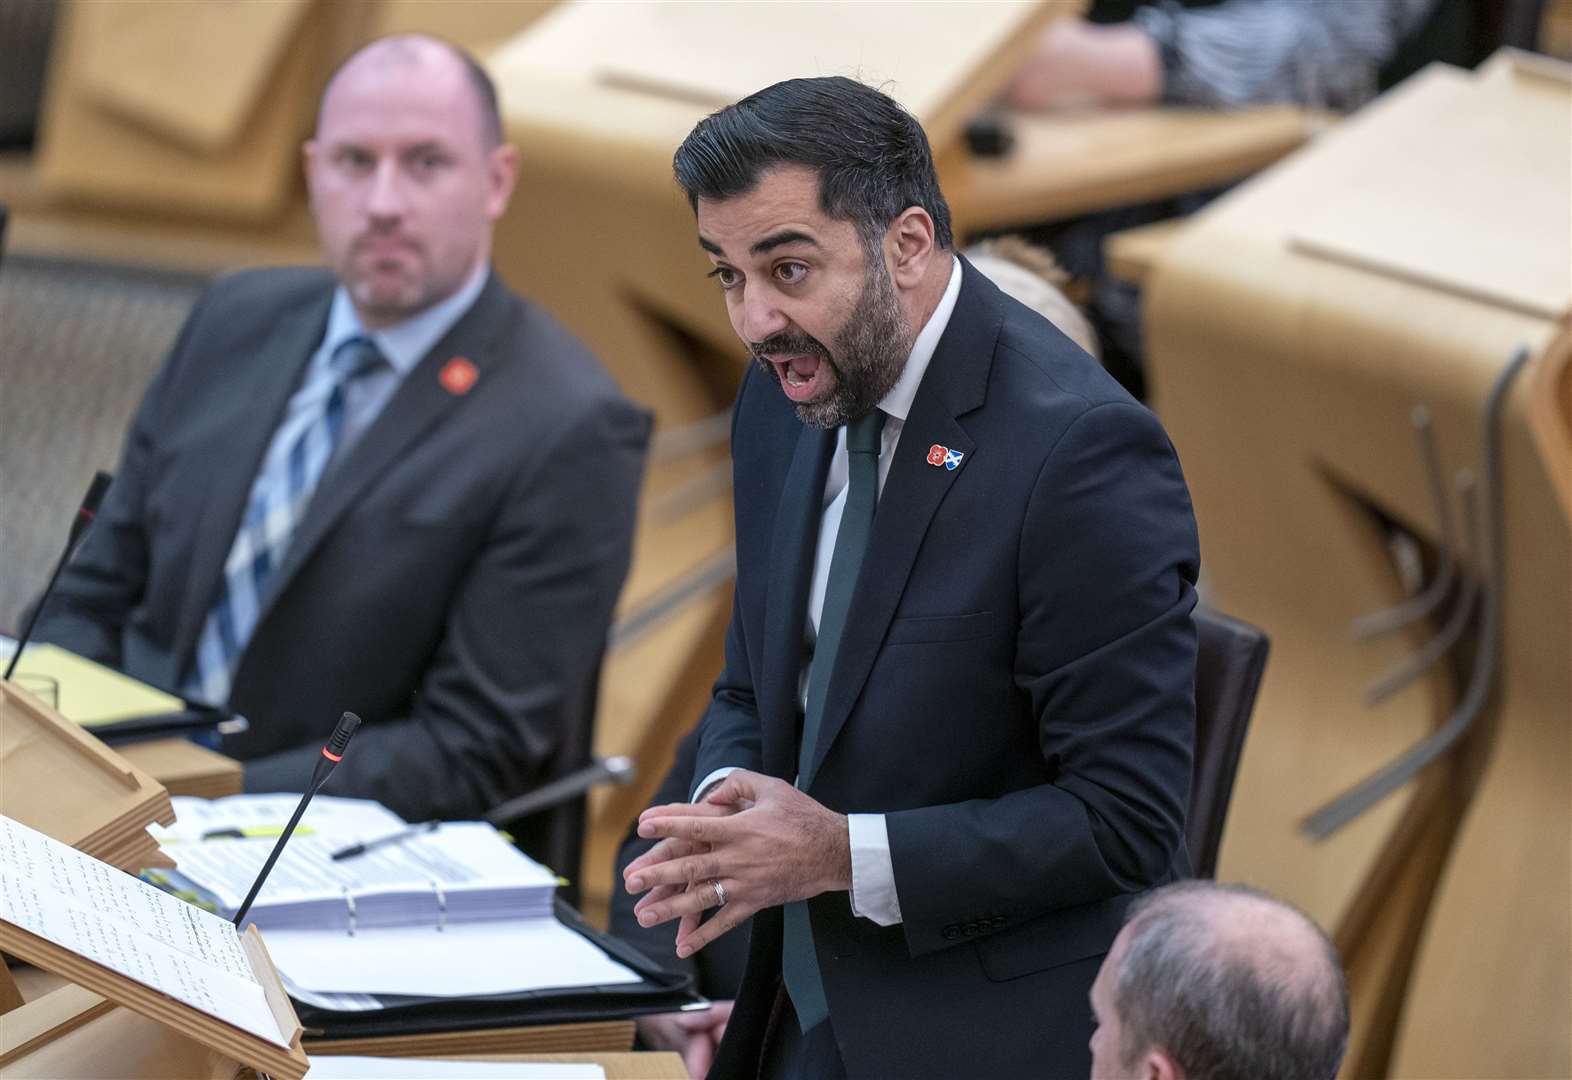 Humza Yousaf said he hopes ongoing talks will see strike action averted (Jane Barlow/PA)